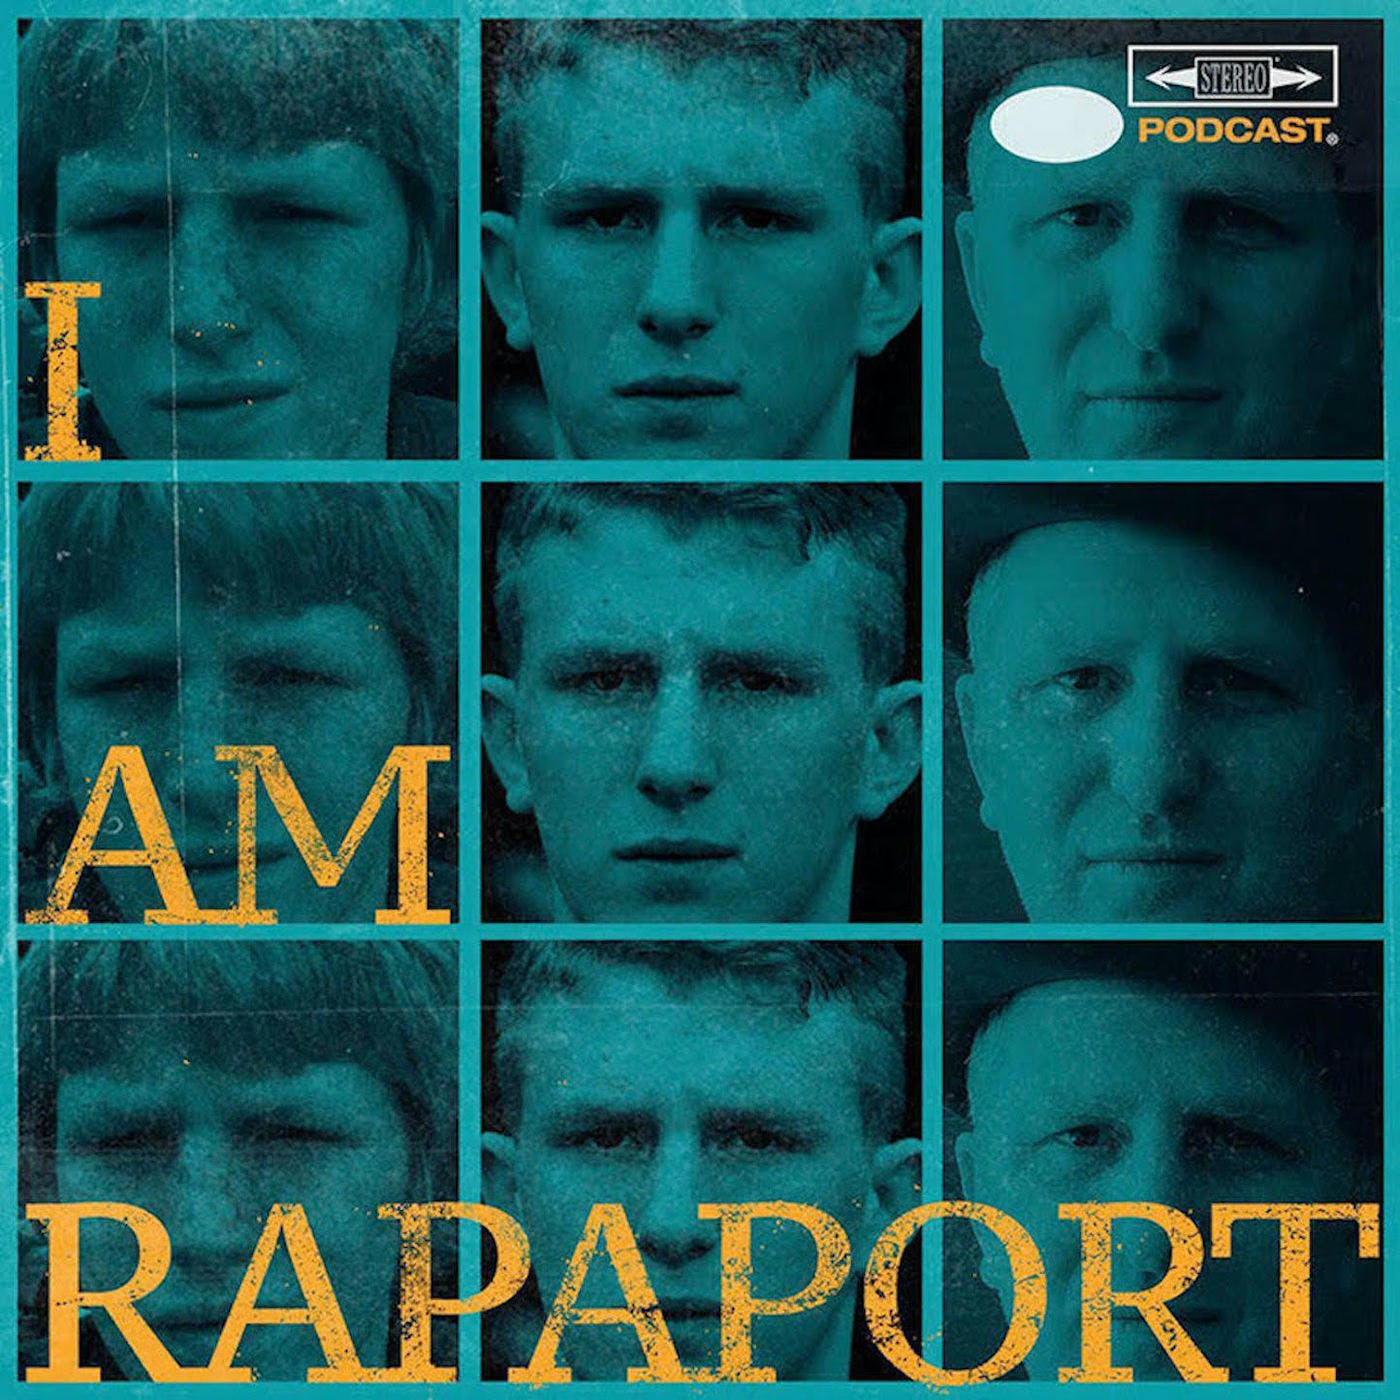 EP 507 - CREED 2 & RAPAPORT ROCKY CHRONICLES ANNOUNCEMENT/MARK ZUCKERBERG GETS THAT WILLIE HUTCH TREATMENT/HOWARD STERN FANTASY FOOTBALL LEAGUE UPDATE